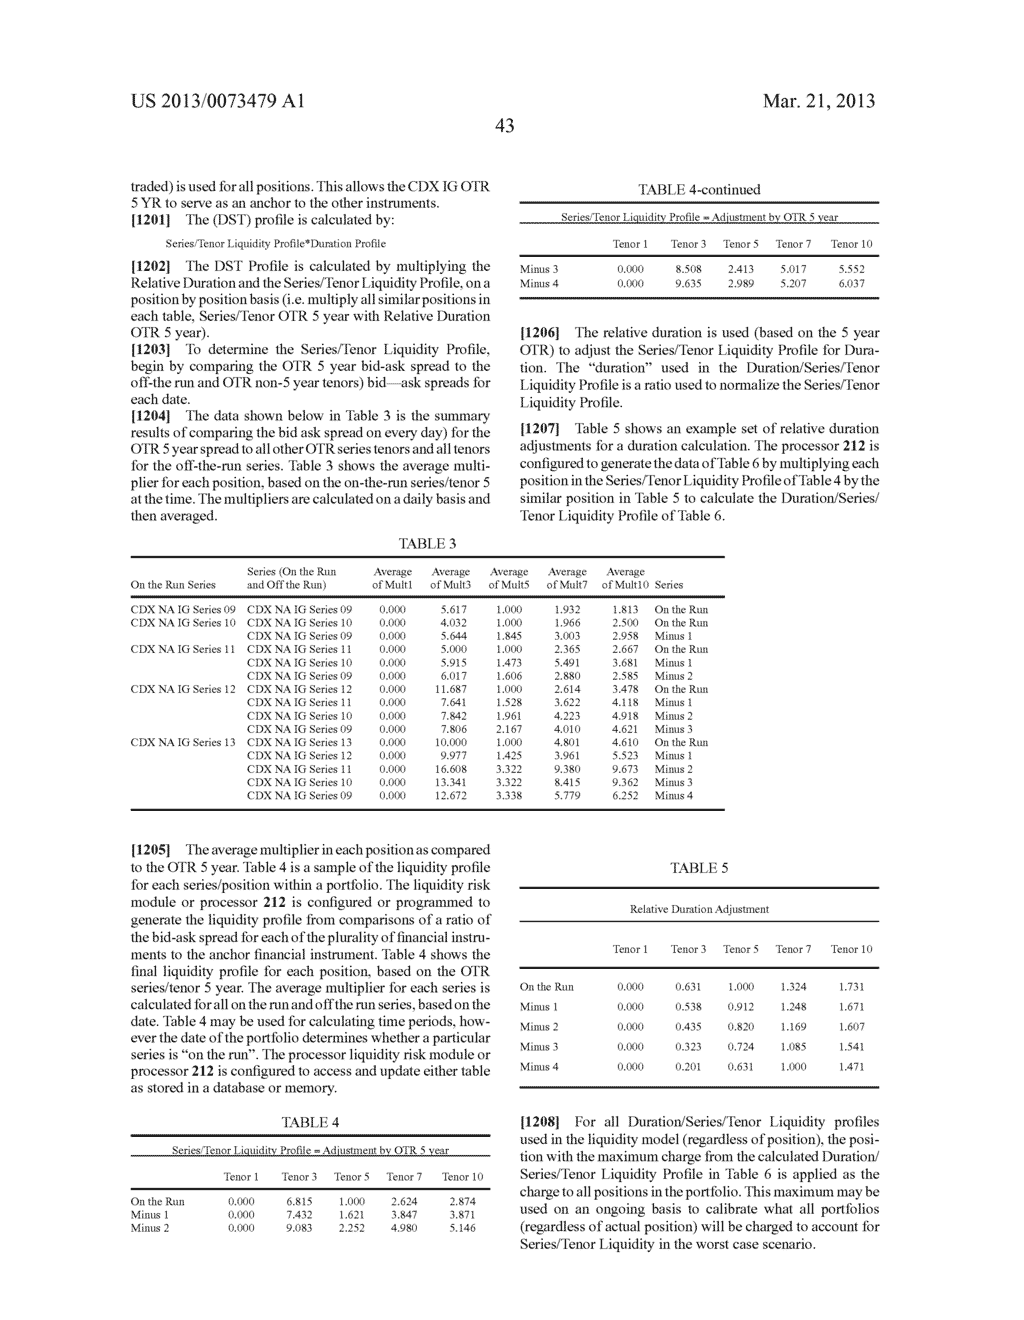 SYSTEM AND METHOD FOR MULTI-FACTOR MODELING, ANALYSIS AND MARGINING OF     CREDIT DEFAULT SWAPS FOR RISK OFFSET - diagram, schematic, and image 52